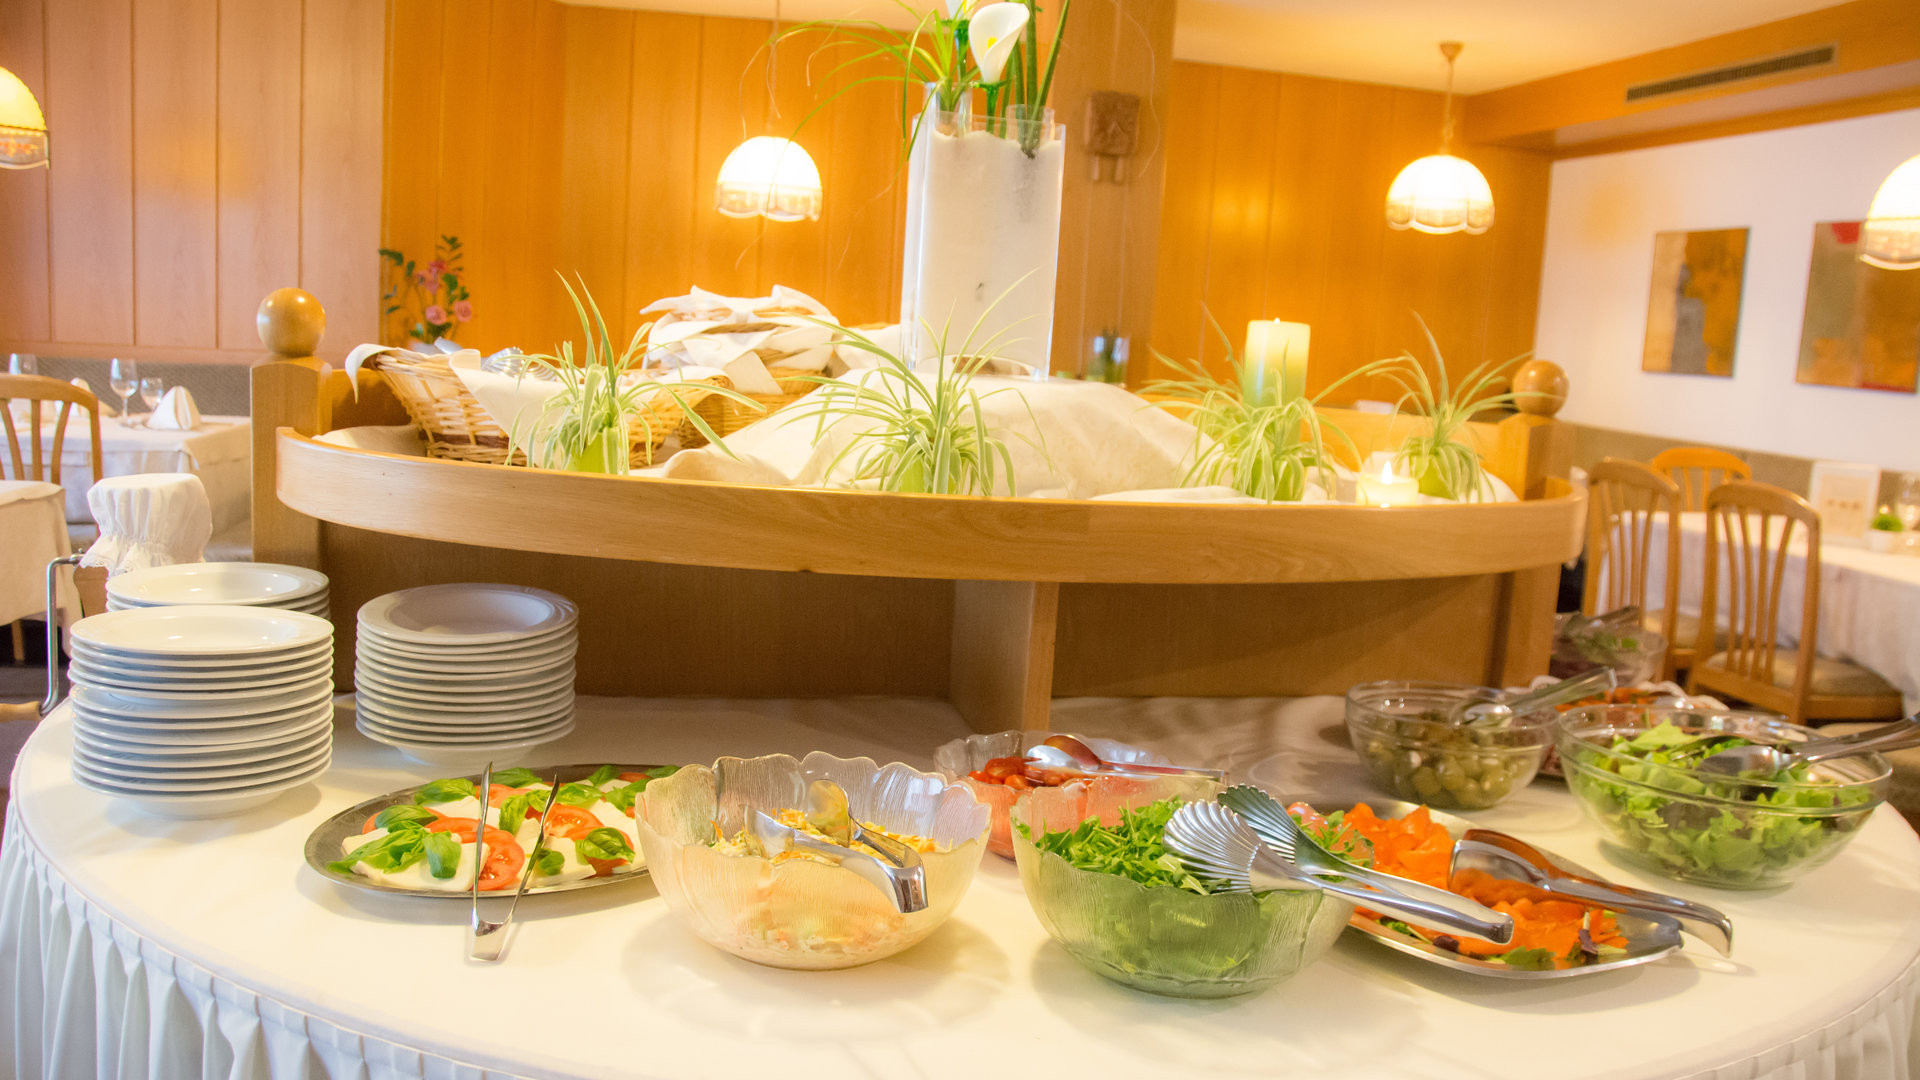 Salad and cold starter buffet at Hotel Schweigl in St. Walburg / Ultental in South Tyrol.